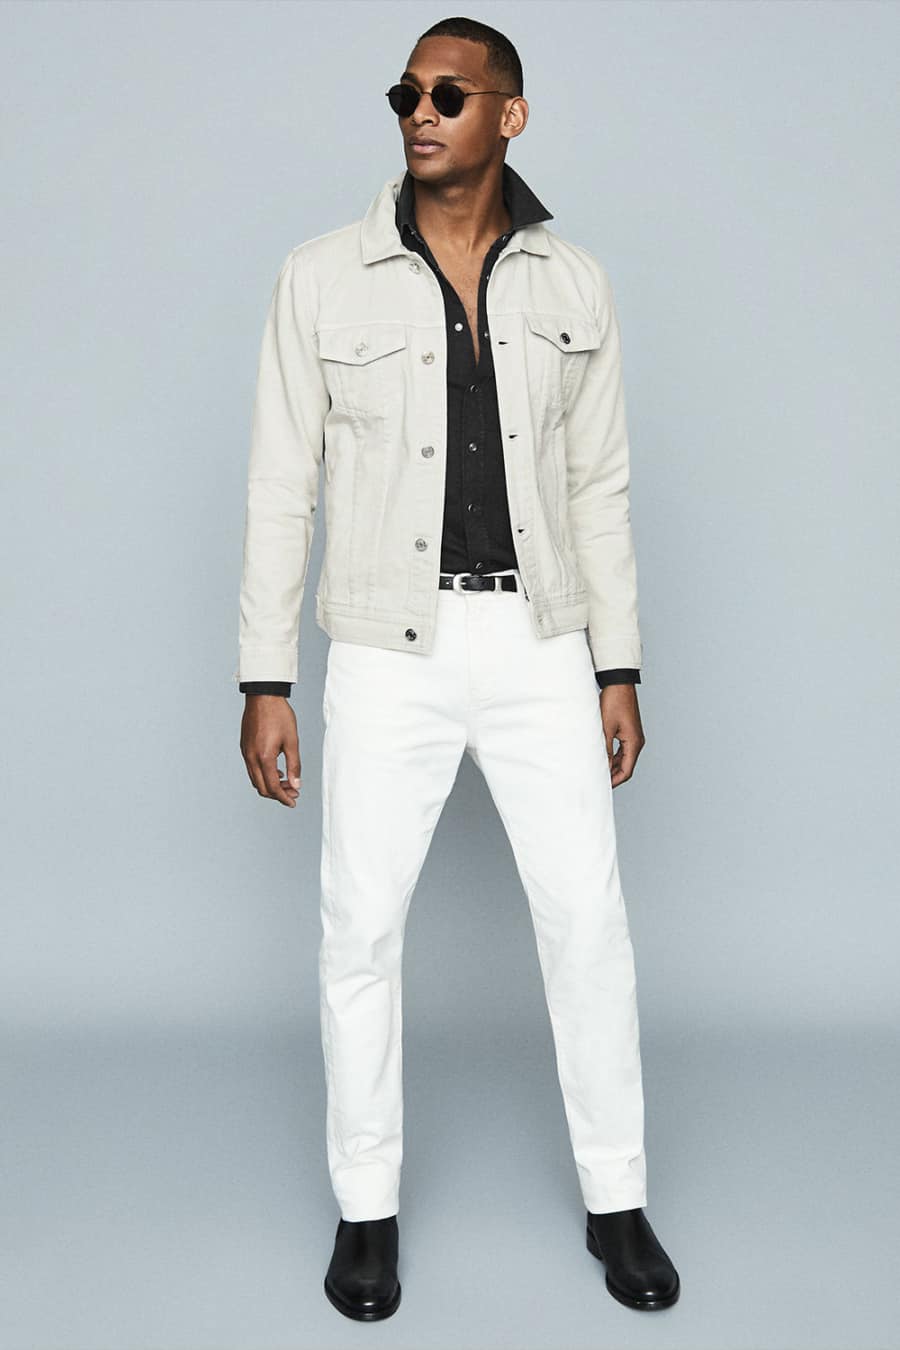 Men's white jeans, white denim jacket, black shirt and black boots outfit